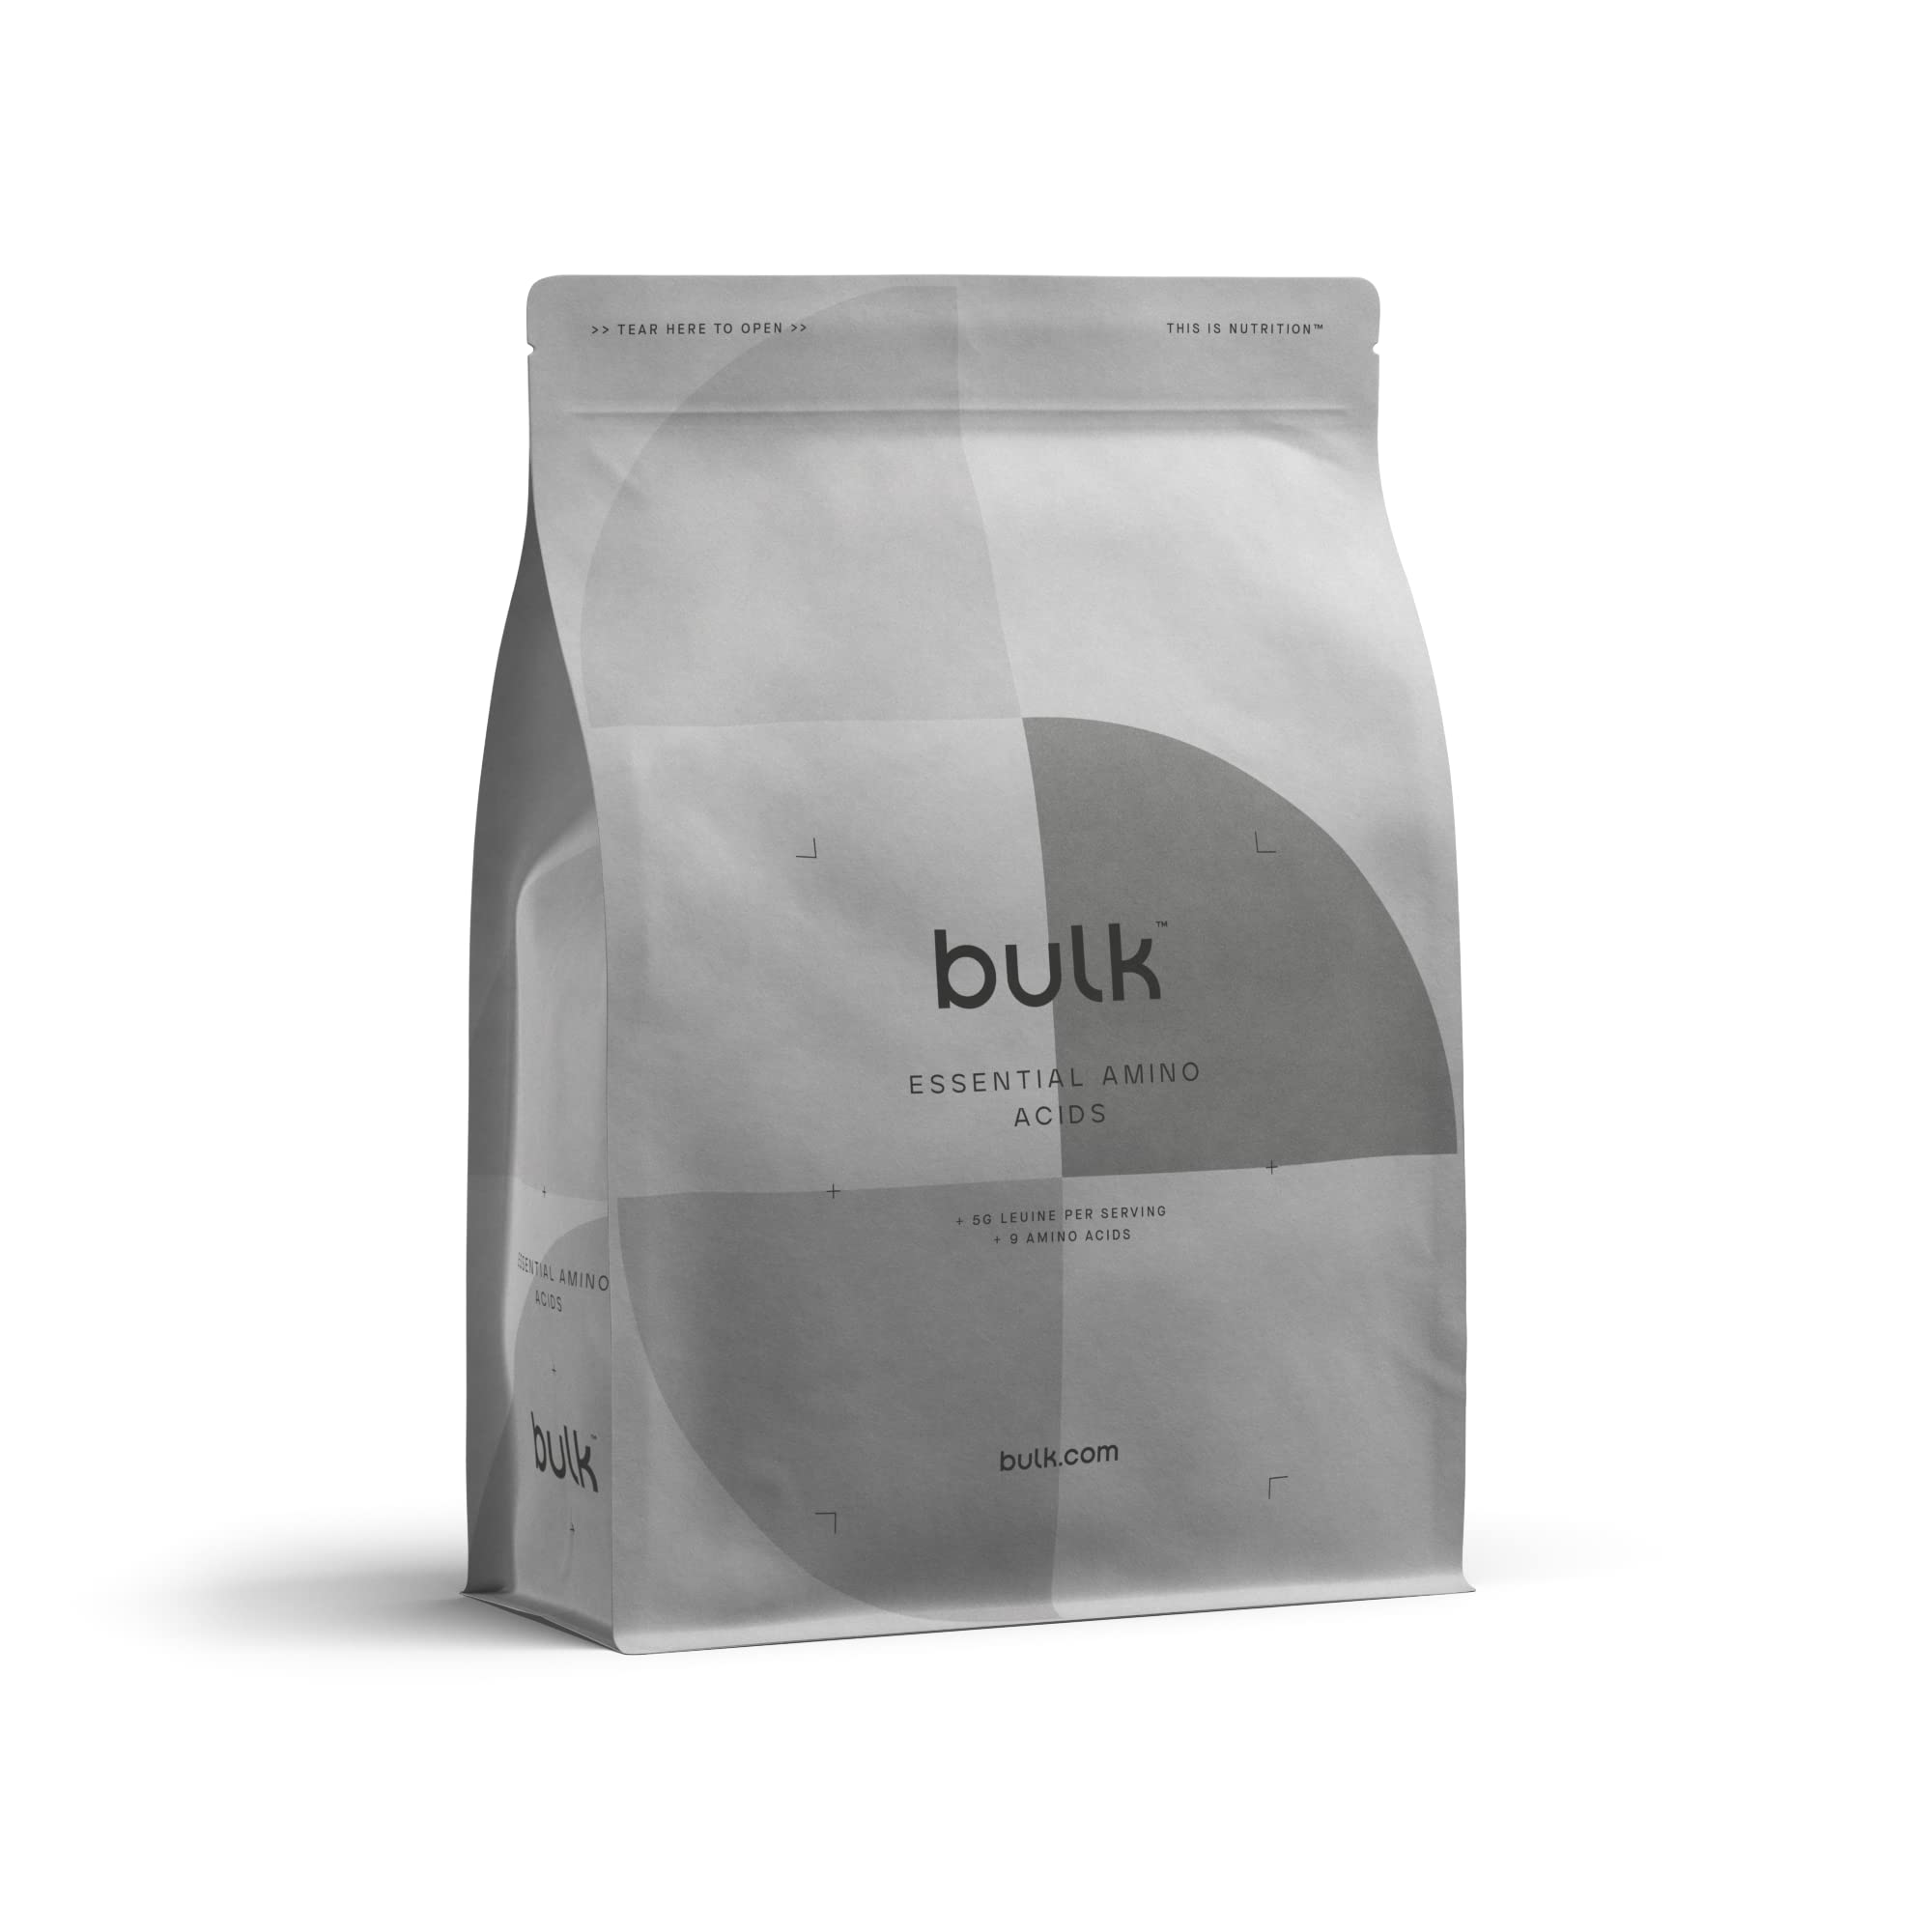 Bulk Pure Essential Amino Acids Powder, Mixed Berry, 500 g, Packaging May Vary